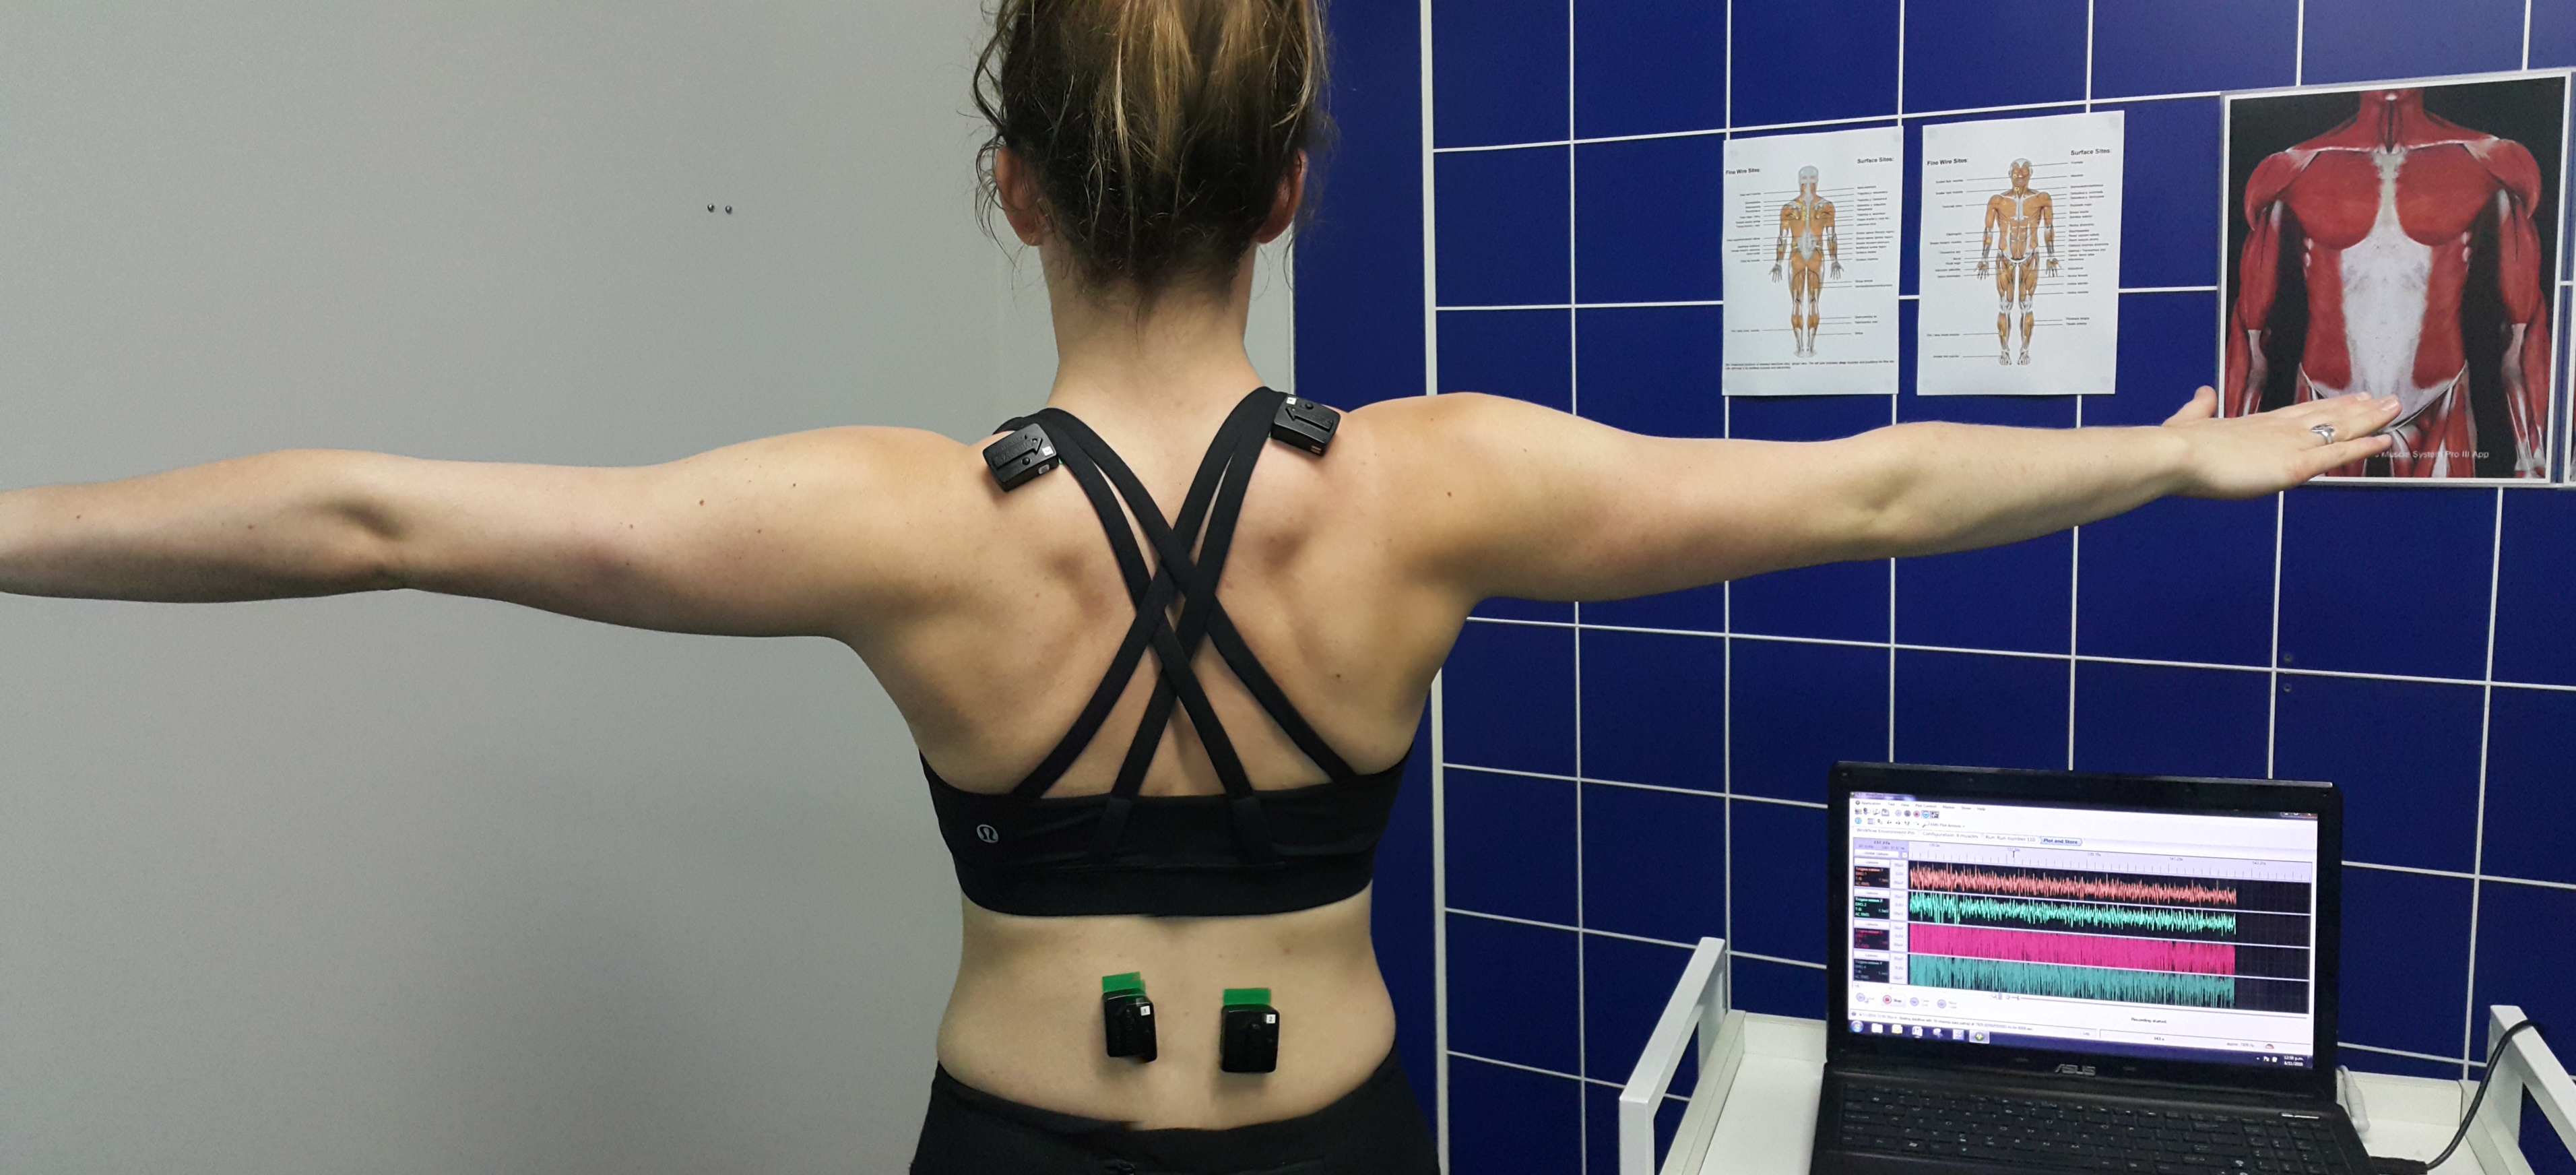 how painful is an emg test